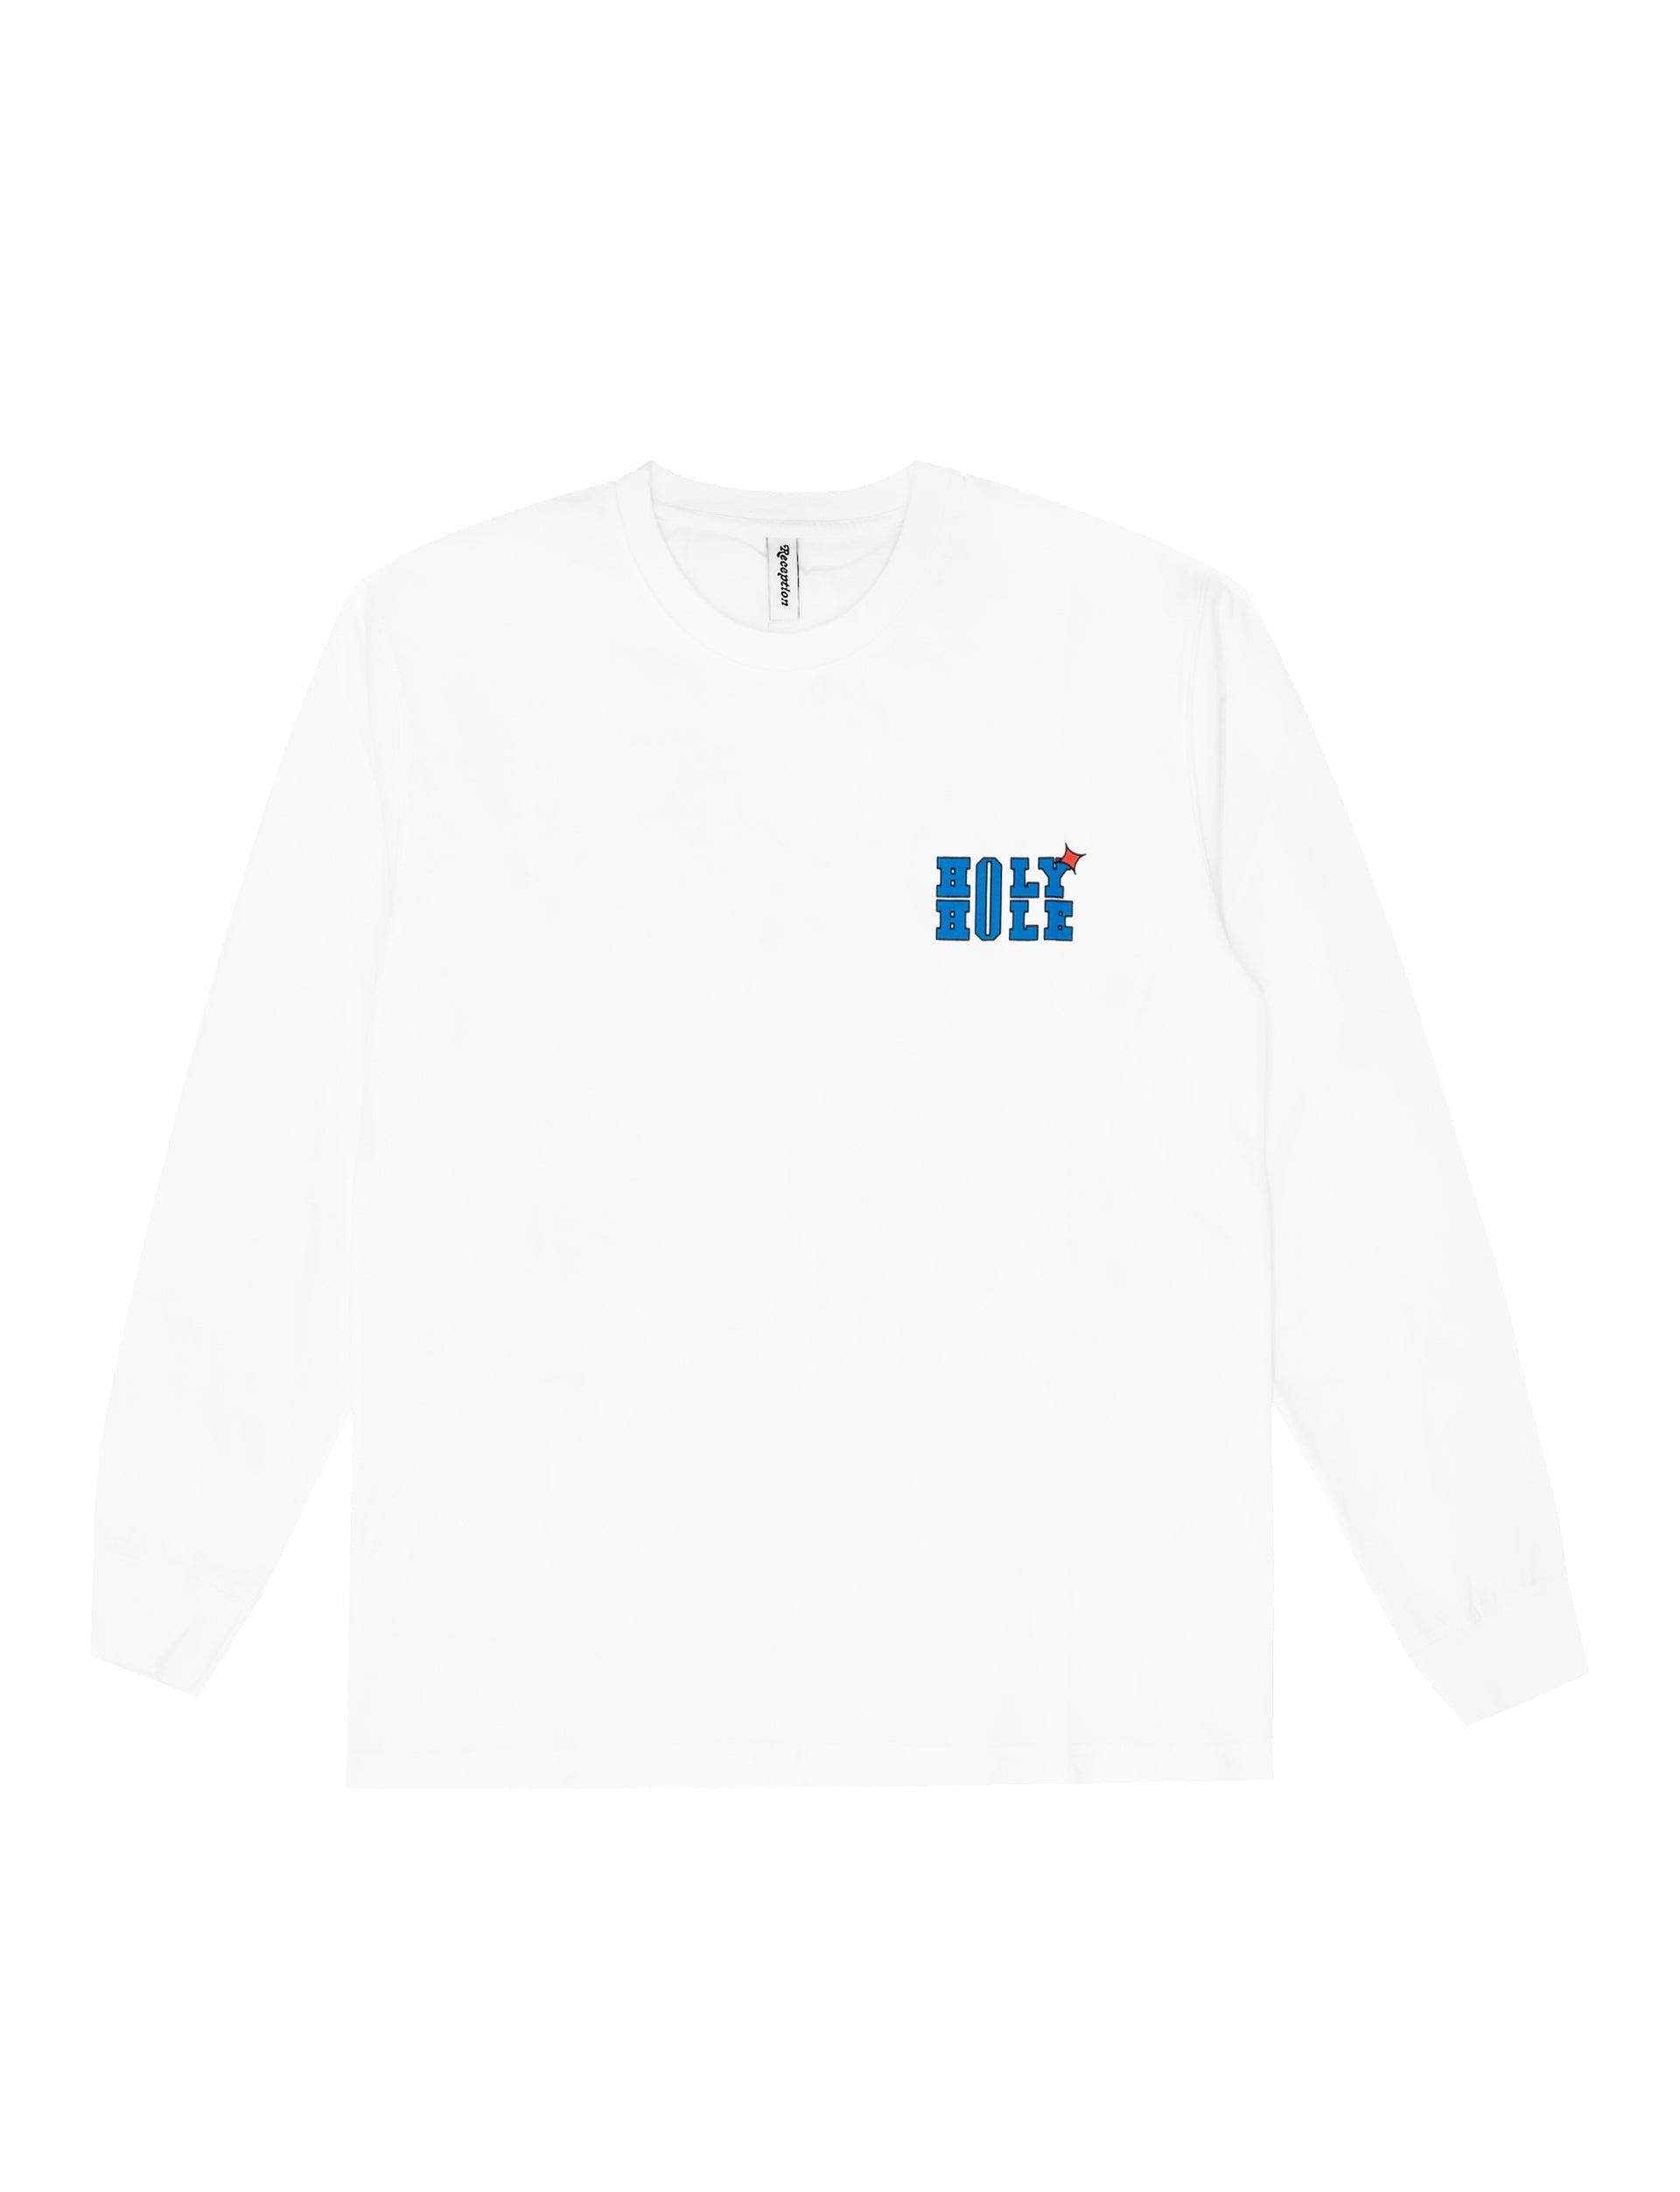 RECEPTION CLOTHING LS TEE HOLY COTTON SINGLE JERSEY WHITE